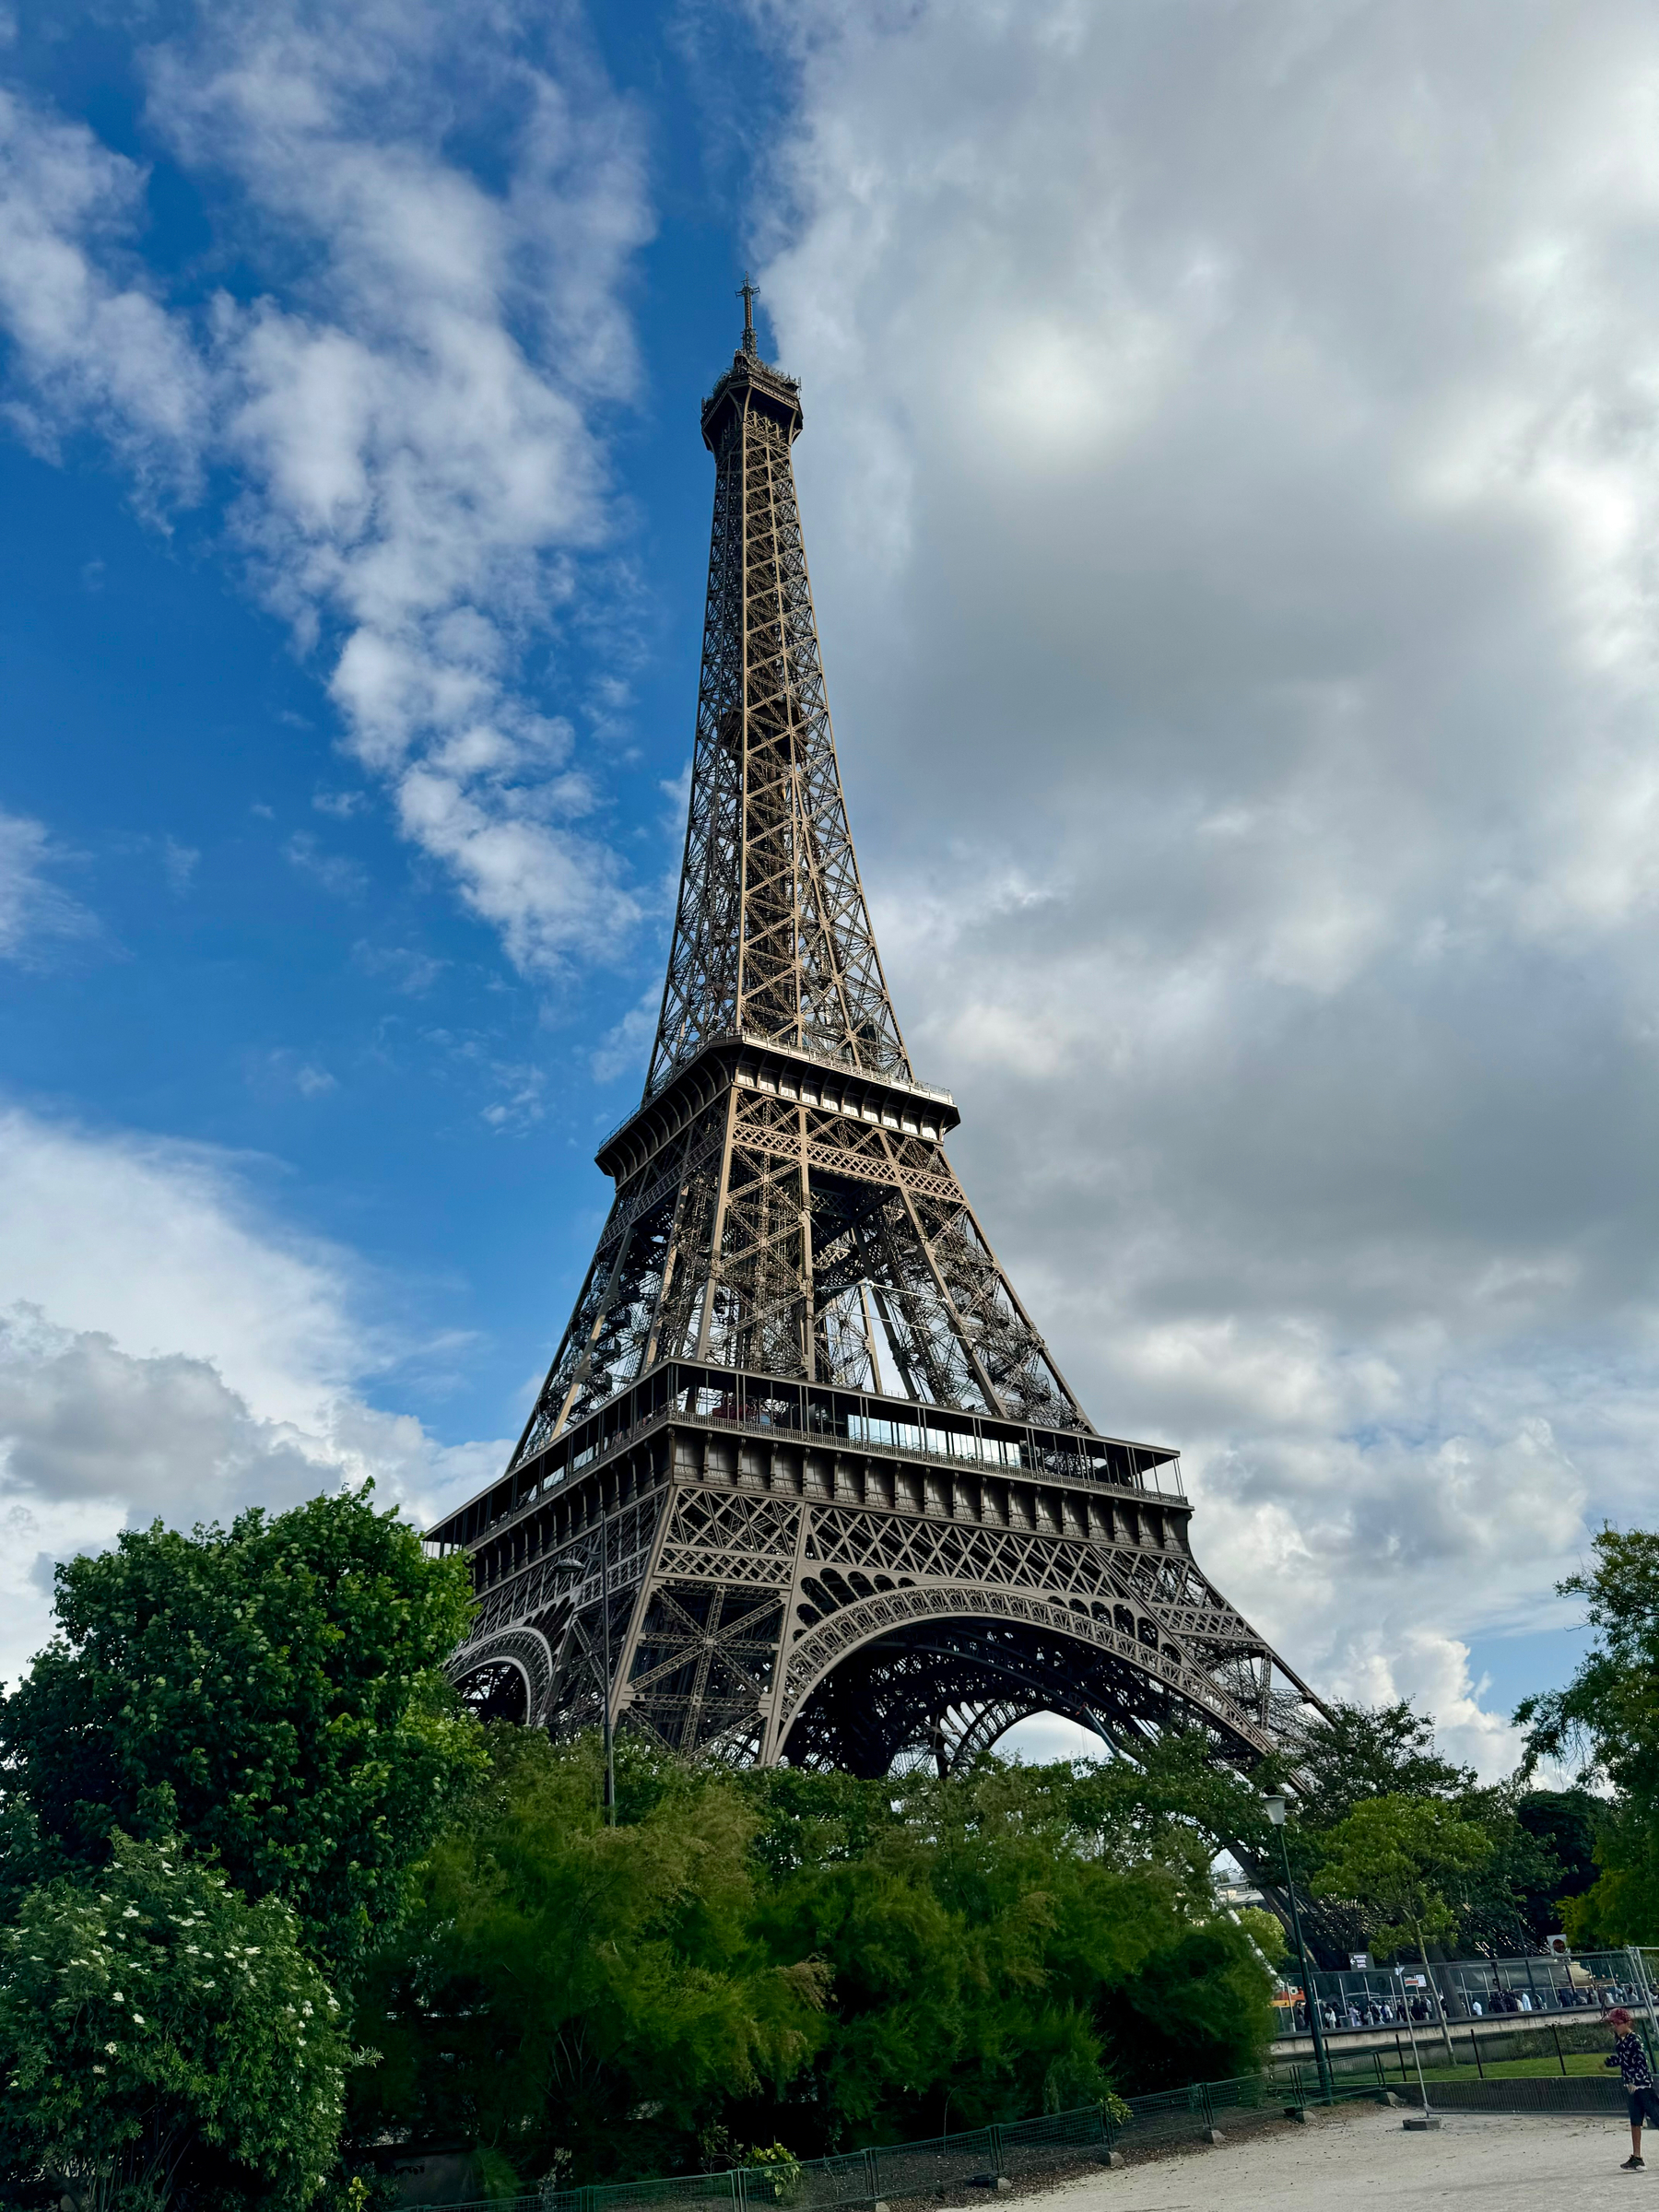 The Eiffel Tower stands tall against a blue sky with clouds, surrounded by green foliage. A person is visible at the bottom right corner, appearing small in comparison to the towering structure.